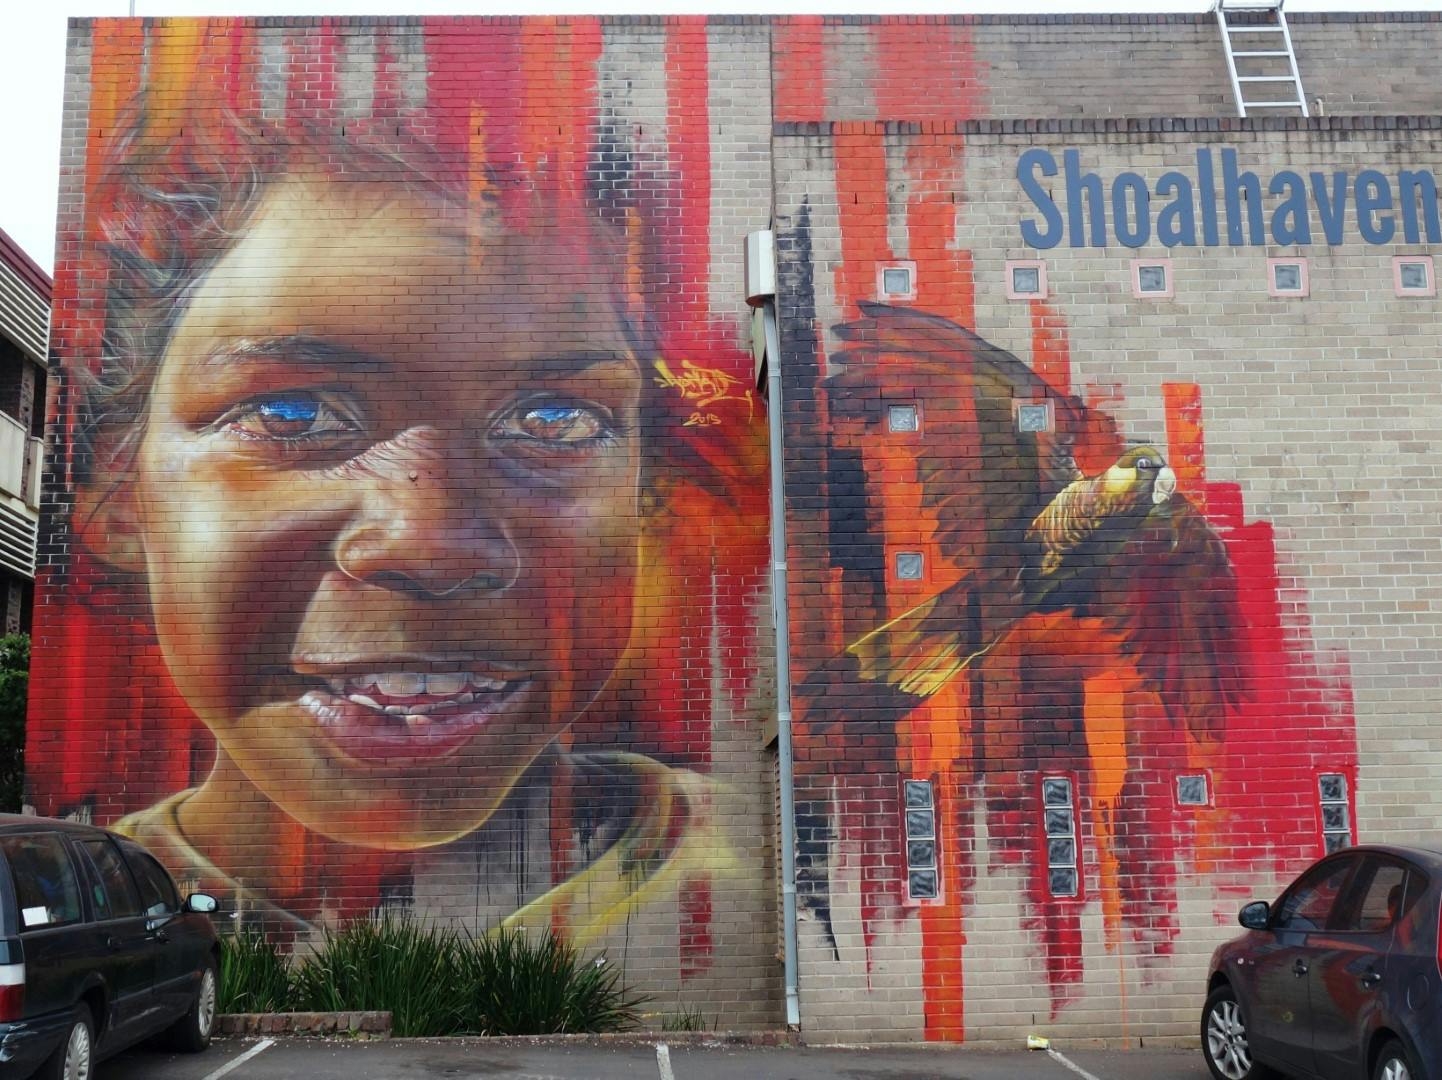 Completed Adnate mural on the wall of the Shoalhaven Regional Art Gallery, Egans Lane Carpark